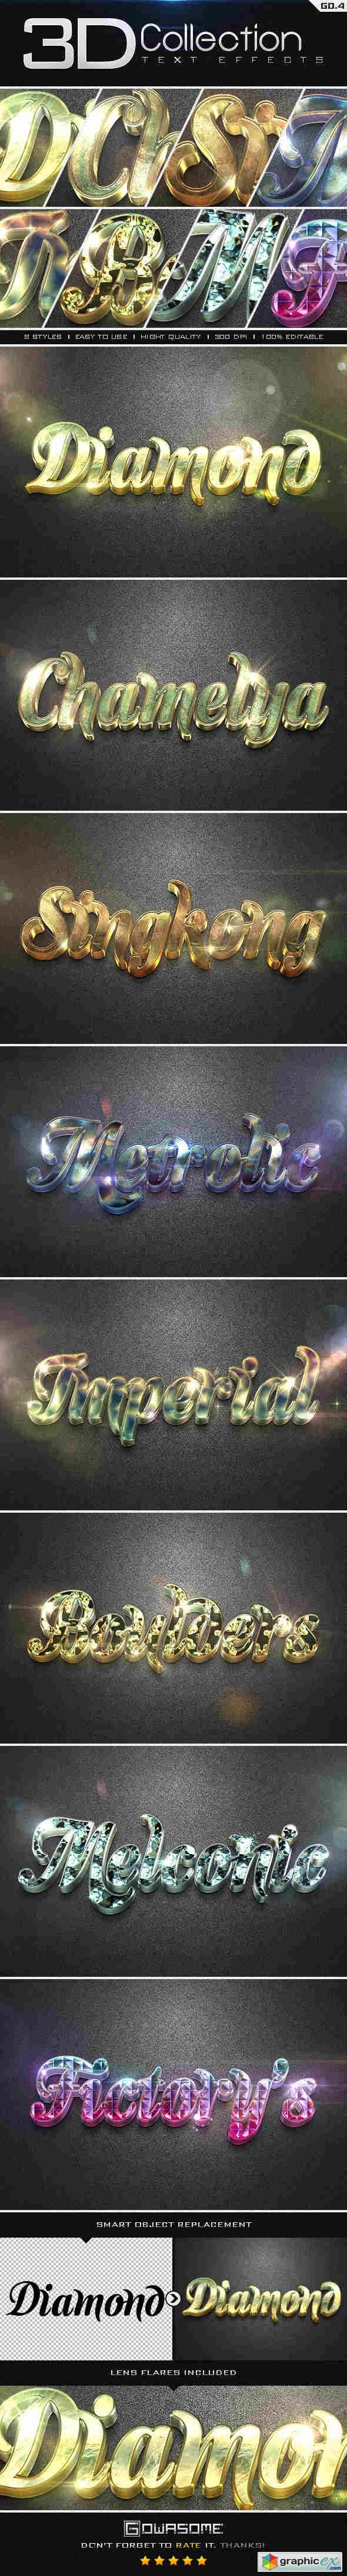 3D Collection Text Effects GO.4  8908225